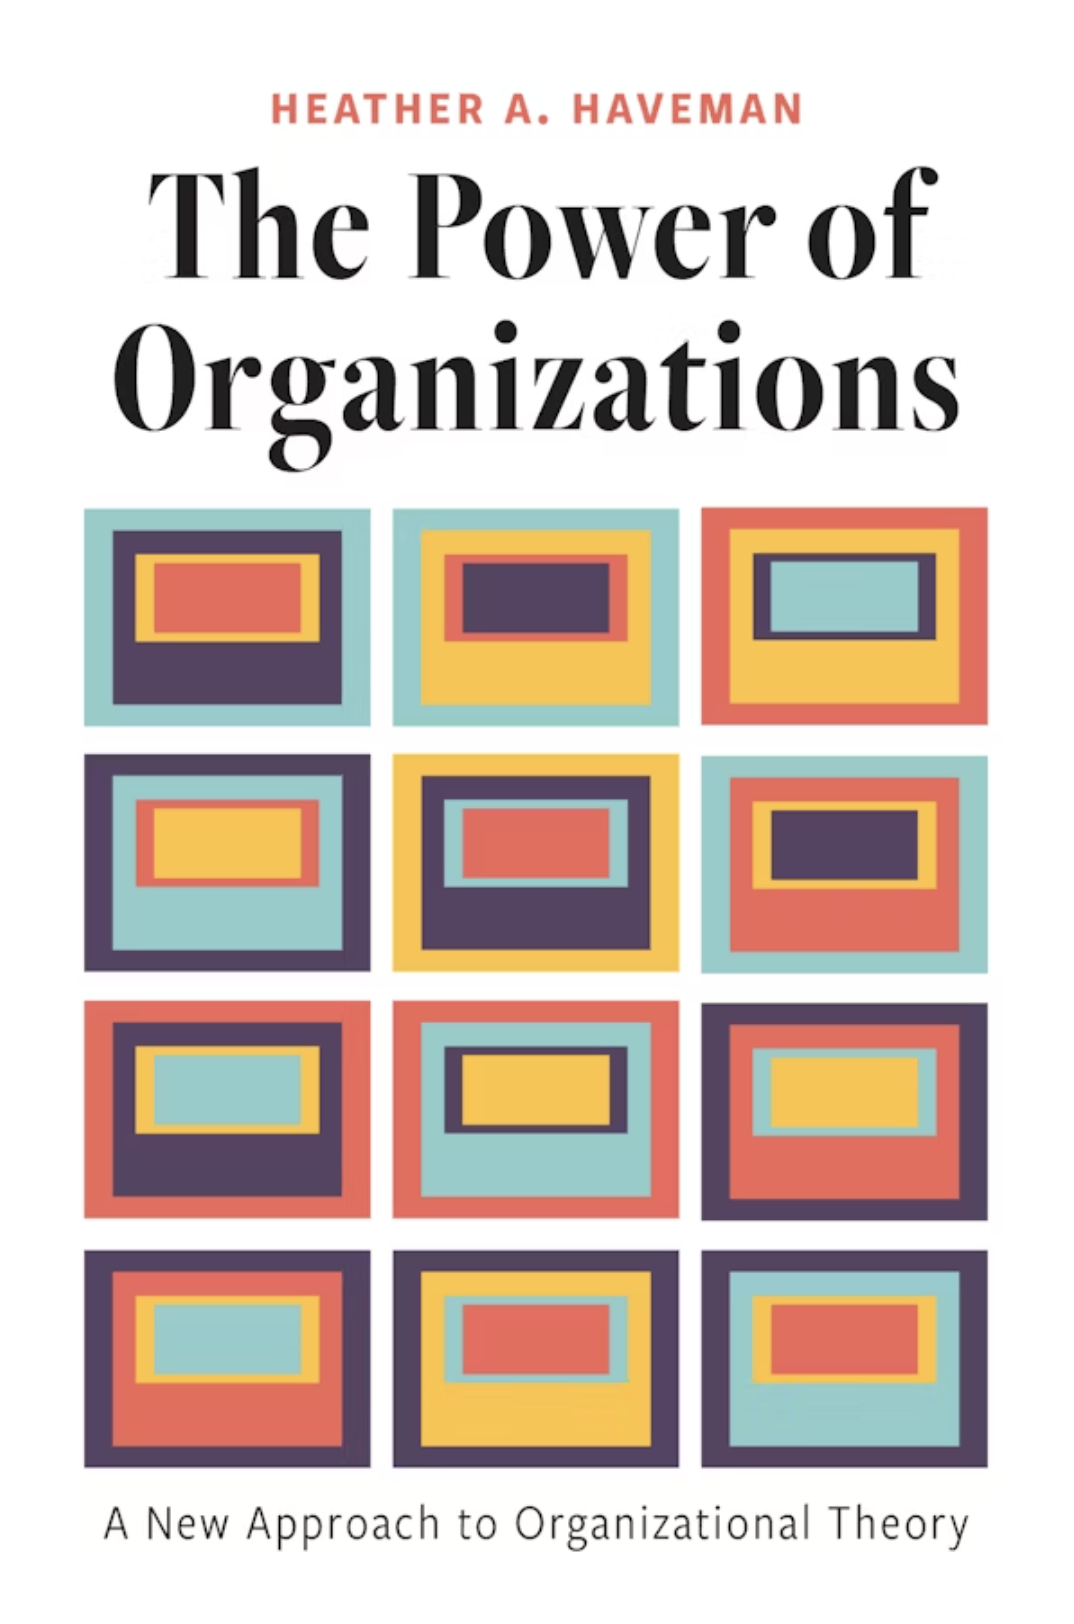 The Power of Organizations: A New Approach to Organizational Theory - SASE